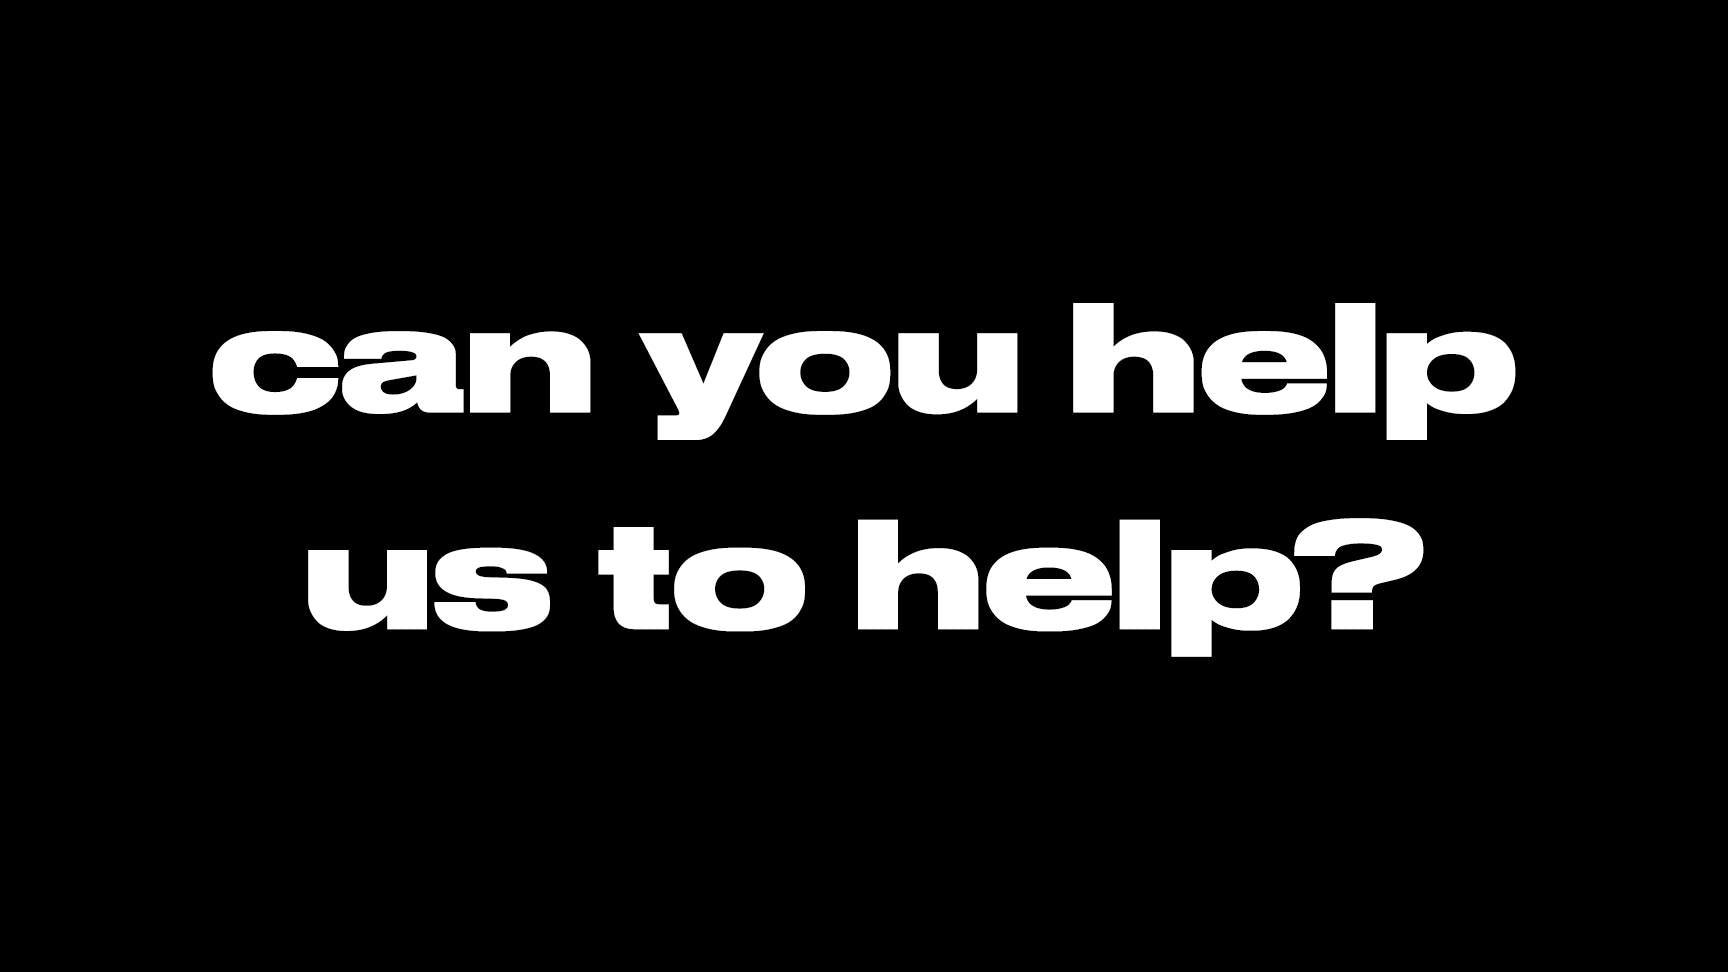 an image that says can you help us to help on a plain black background